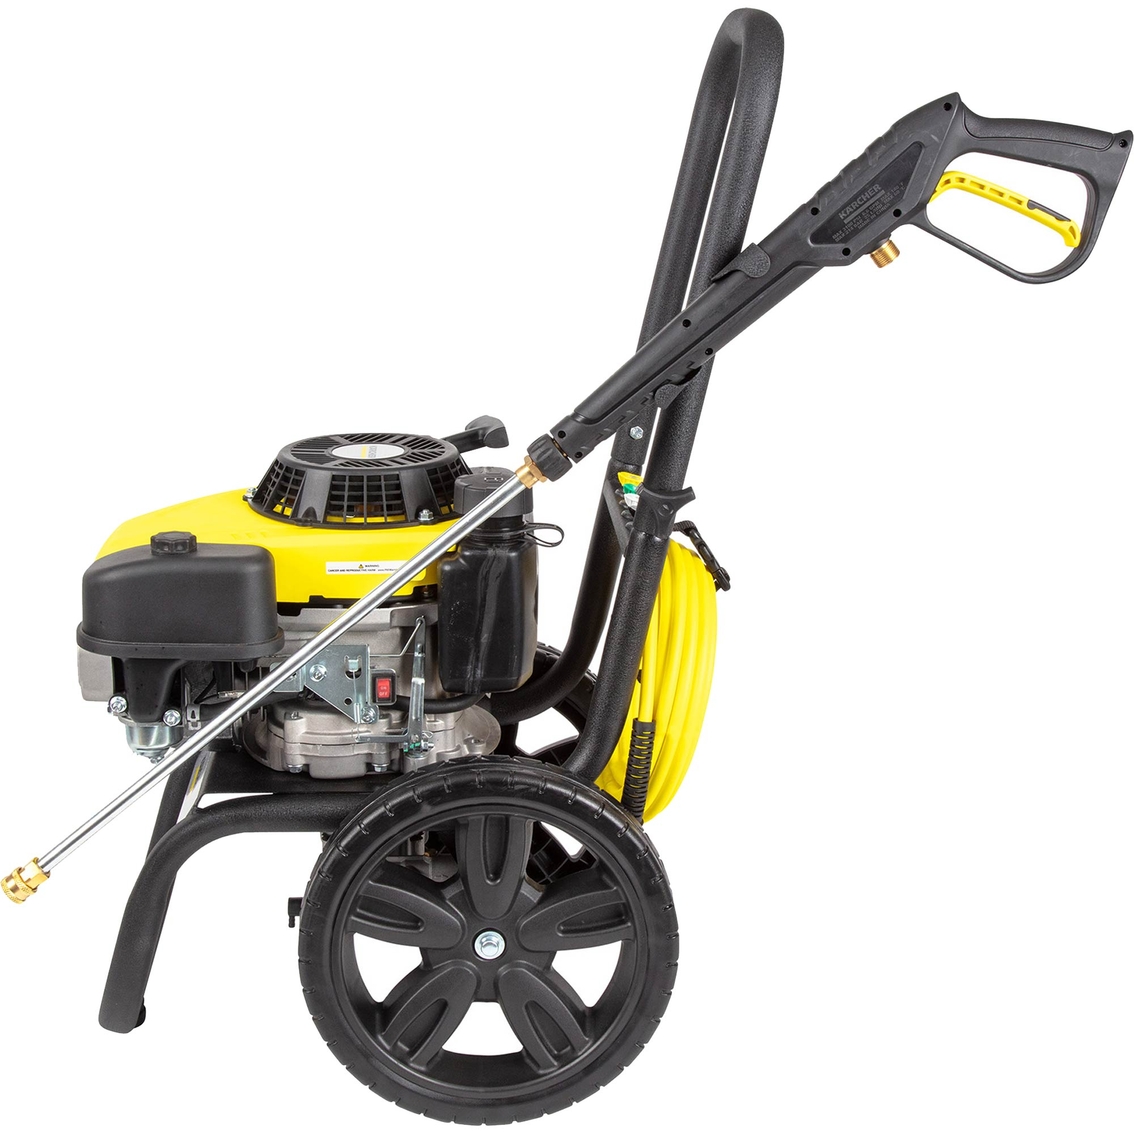 Karcher G 2900 E 2900 PSI 2.6 GPM Axial Pump Gas Pressure Washer with 4 Nozzles - Image 3 of 7